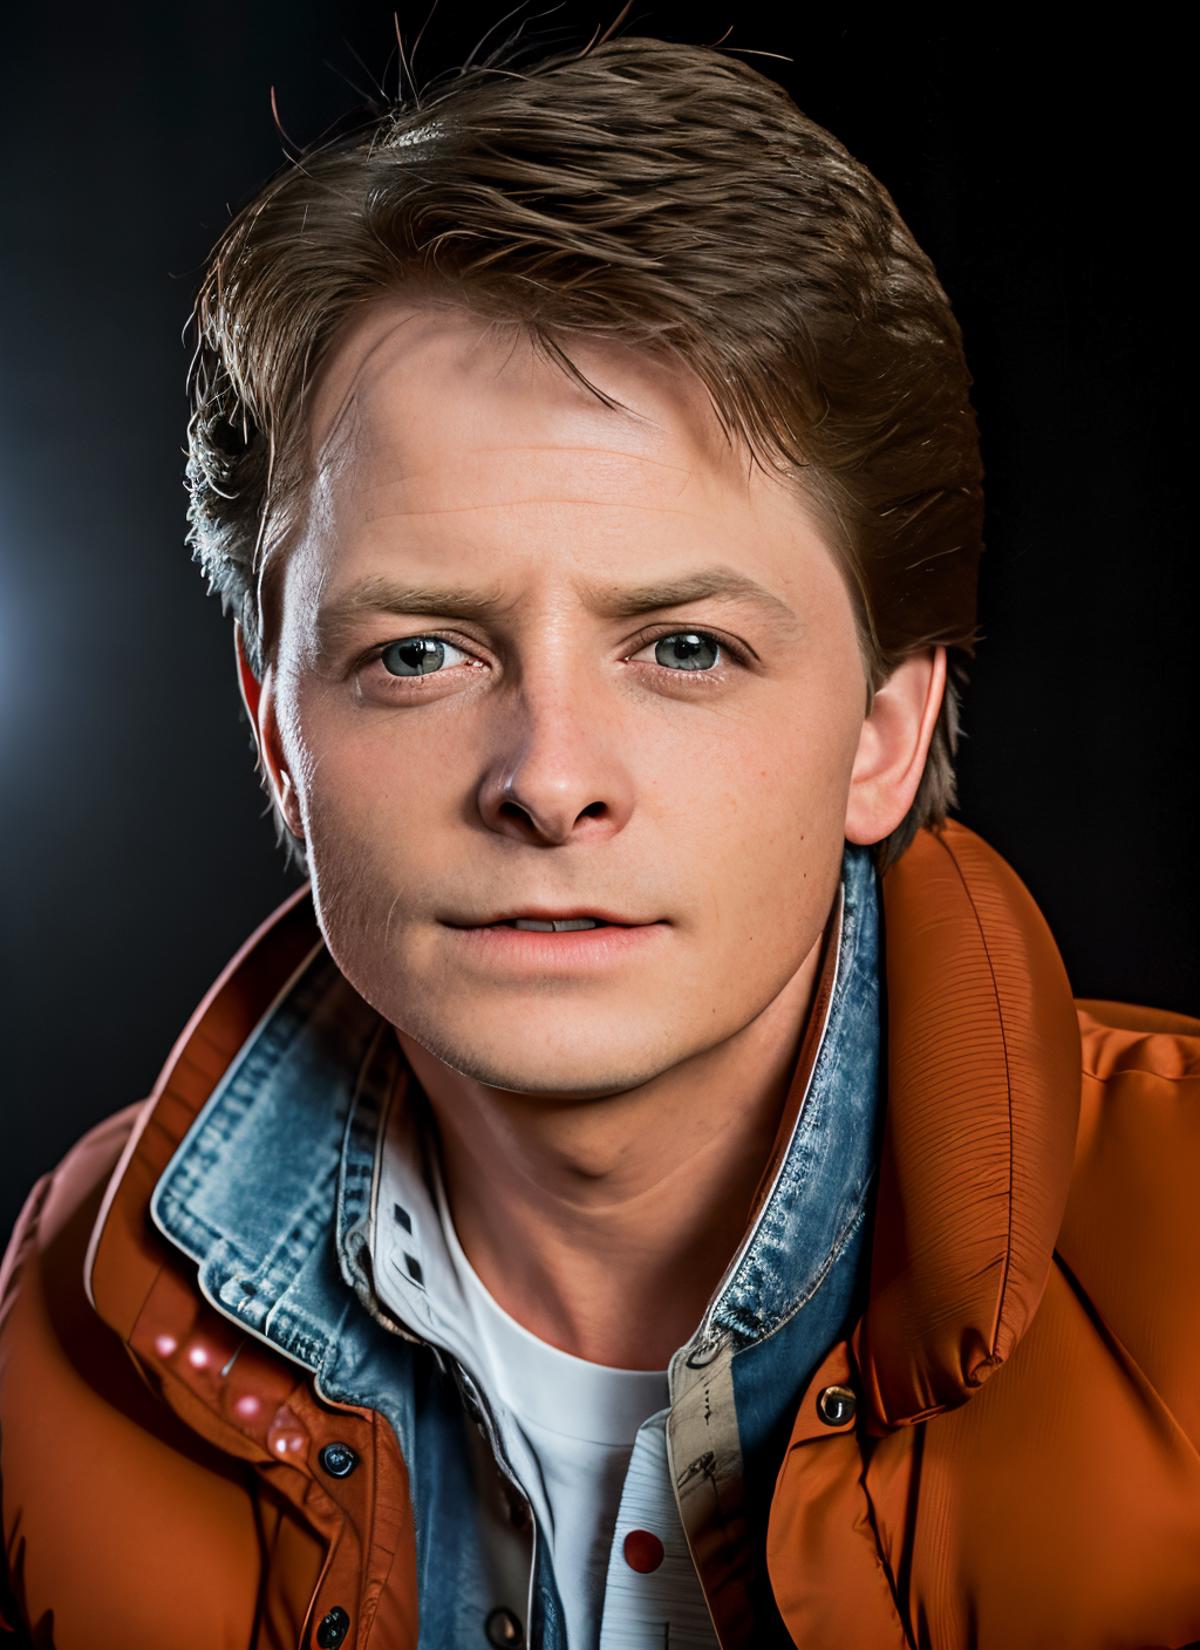 Michael J. Fox (Marty McFly from Back to the Future Trilogy) image by astragartist